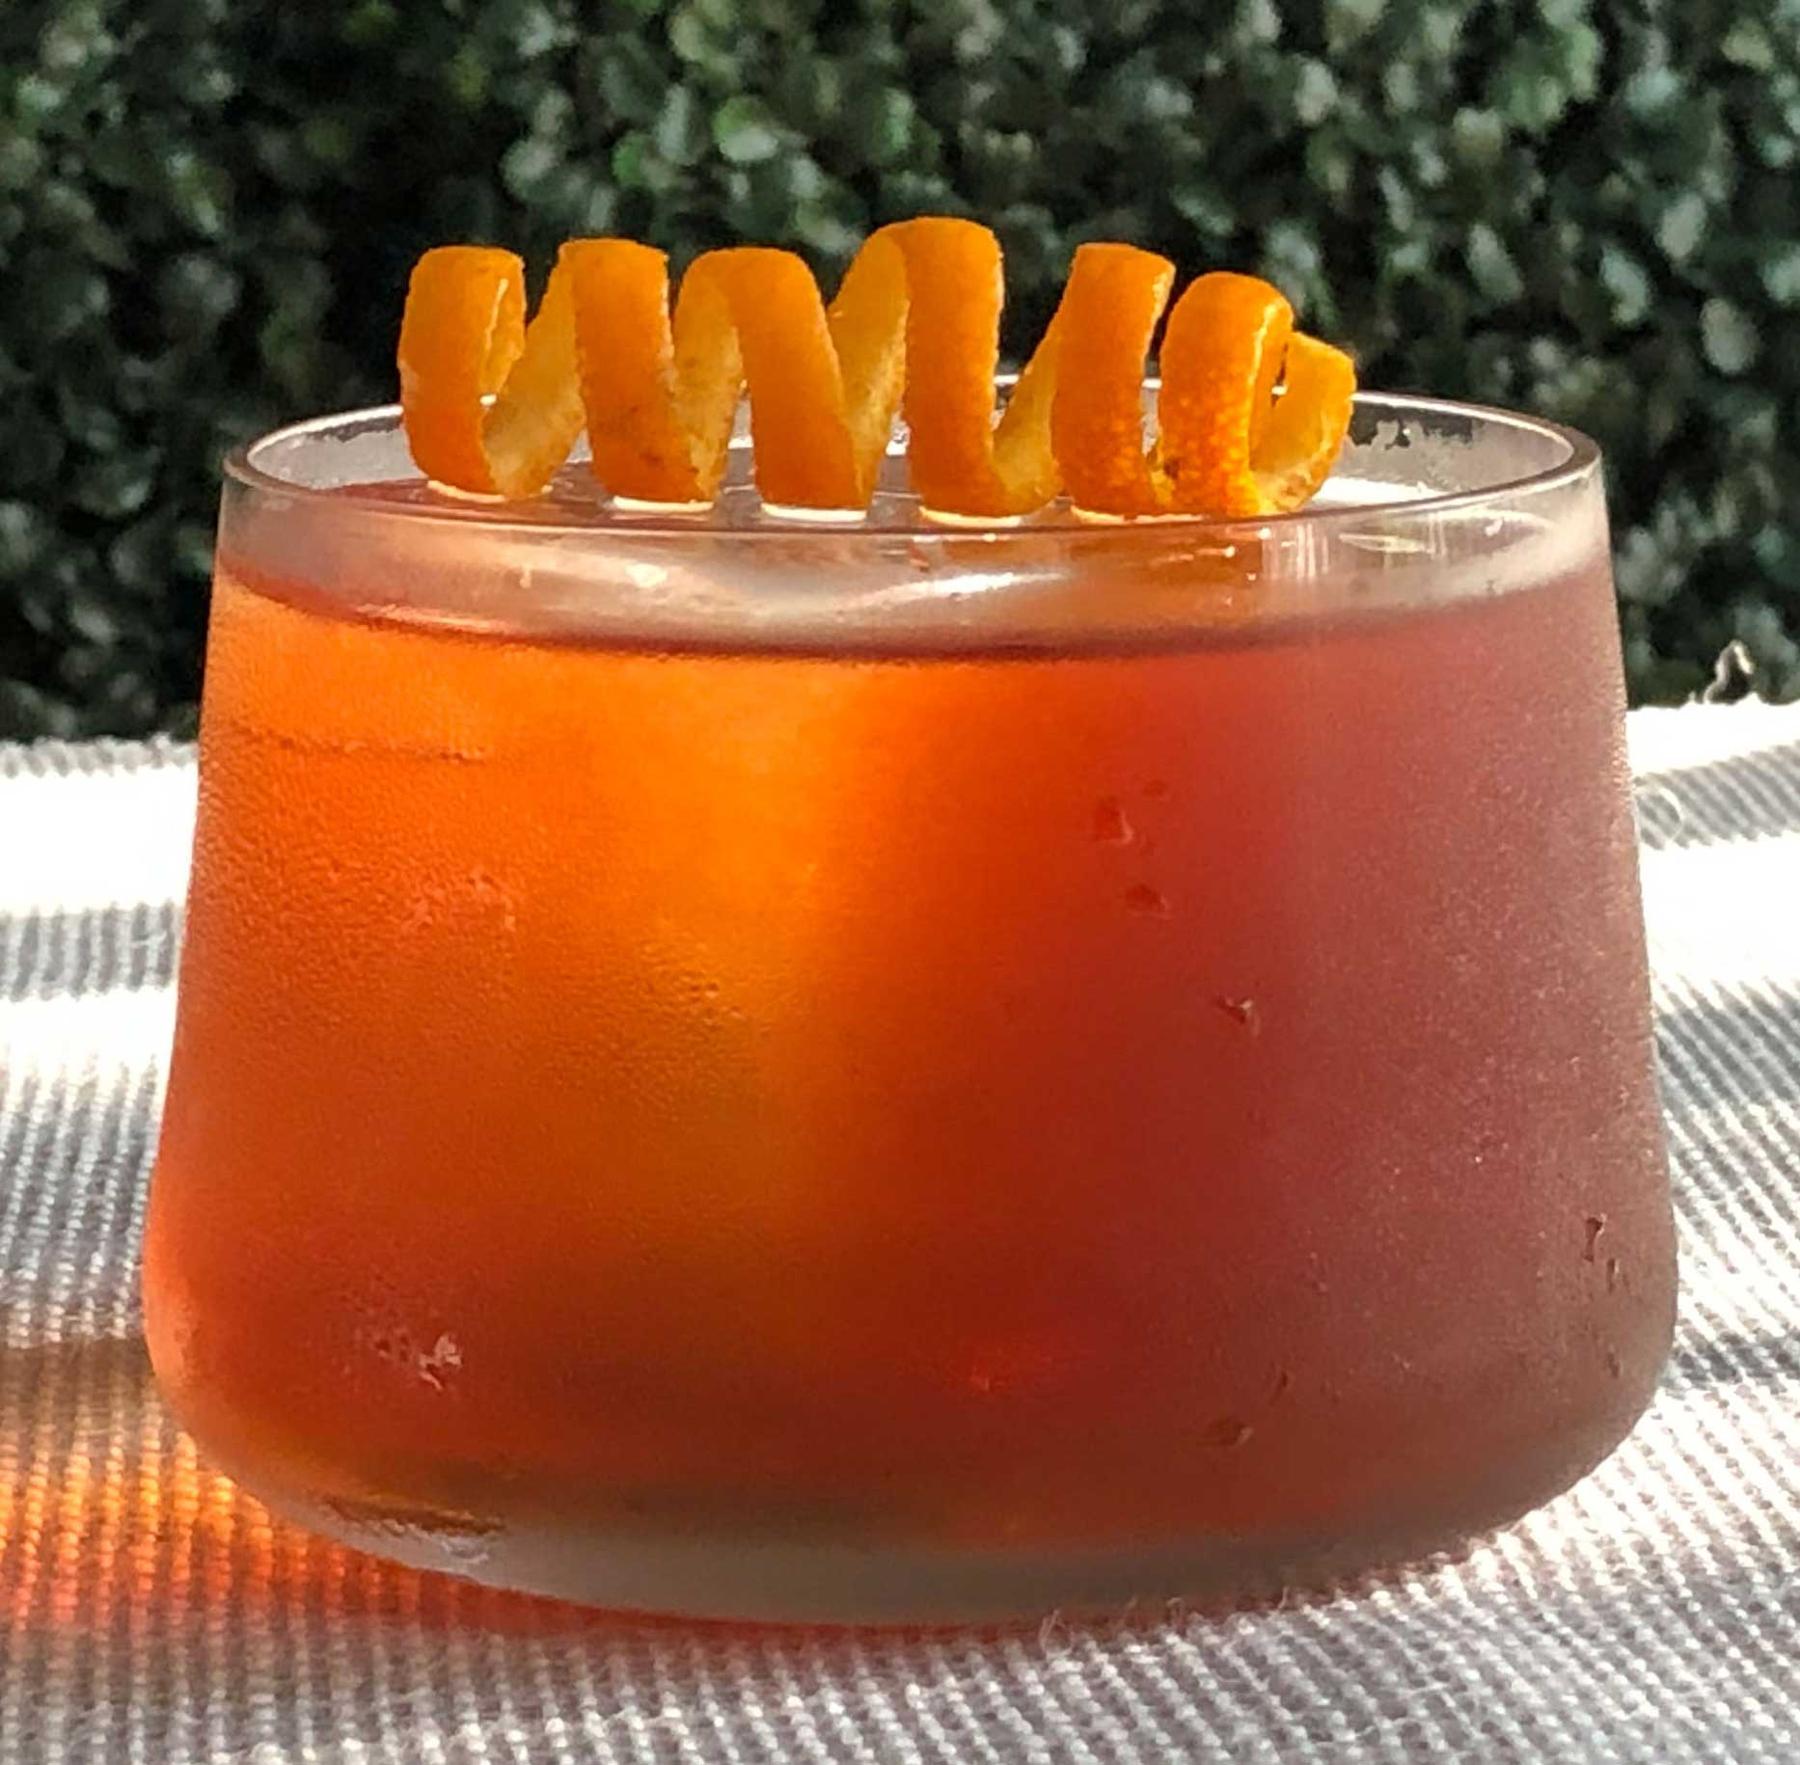 An example of the Reunited, the mixed drink (drink) featuring rye whiskey, Comoz Blanc Vermouth de Chambèry, Aperitivo Cappelletti, Angostura bitters, and orange twist; photo by Lee Edwards